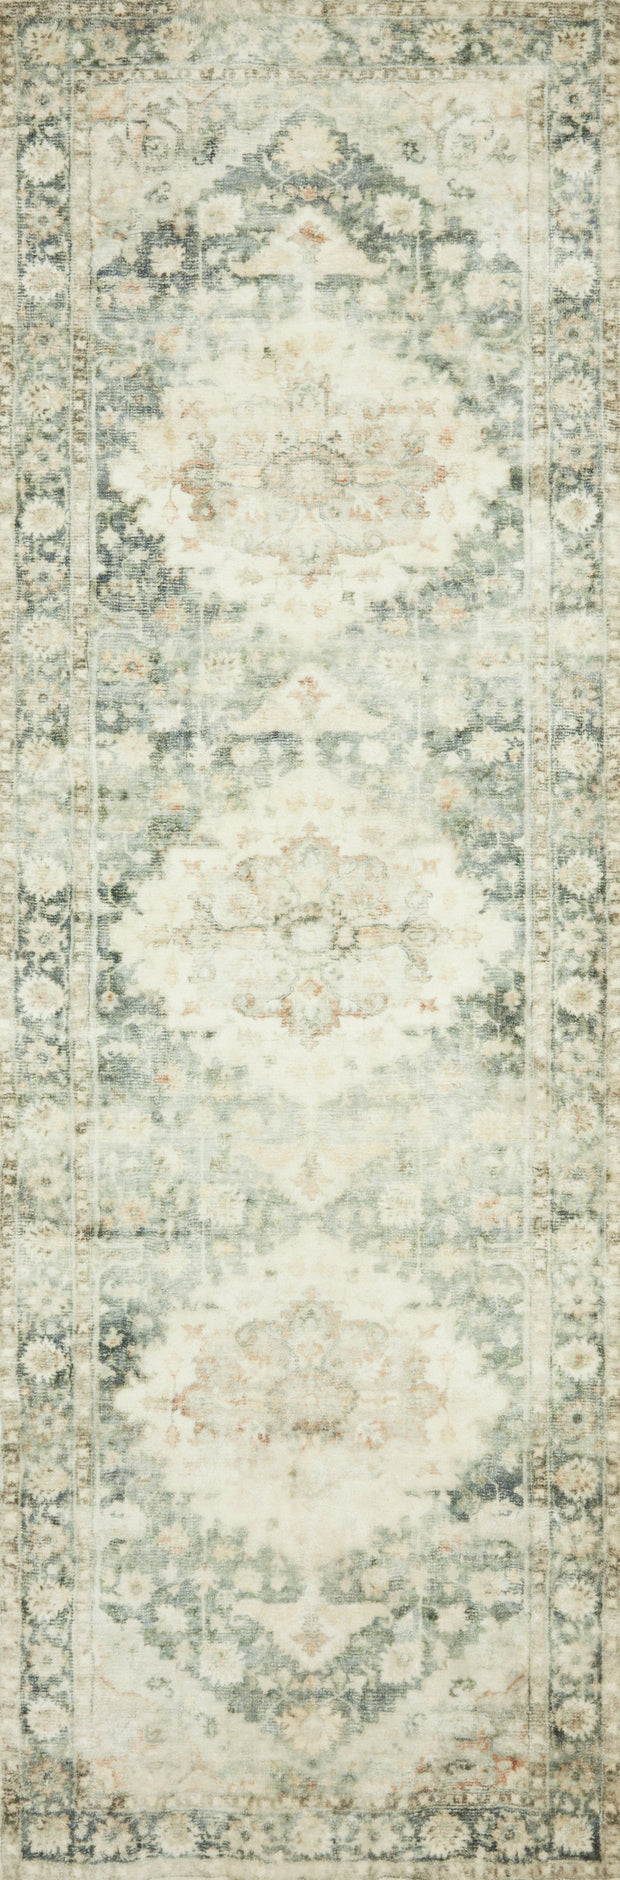 Rosette Rug in Teal / Ivory by Loloi II